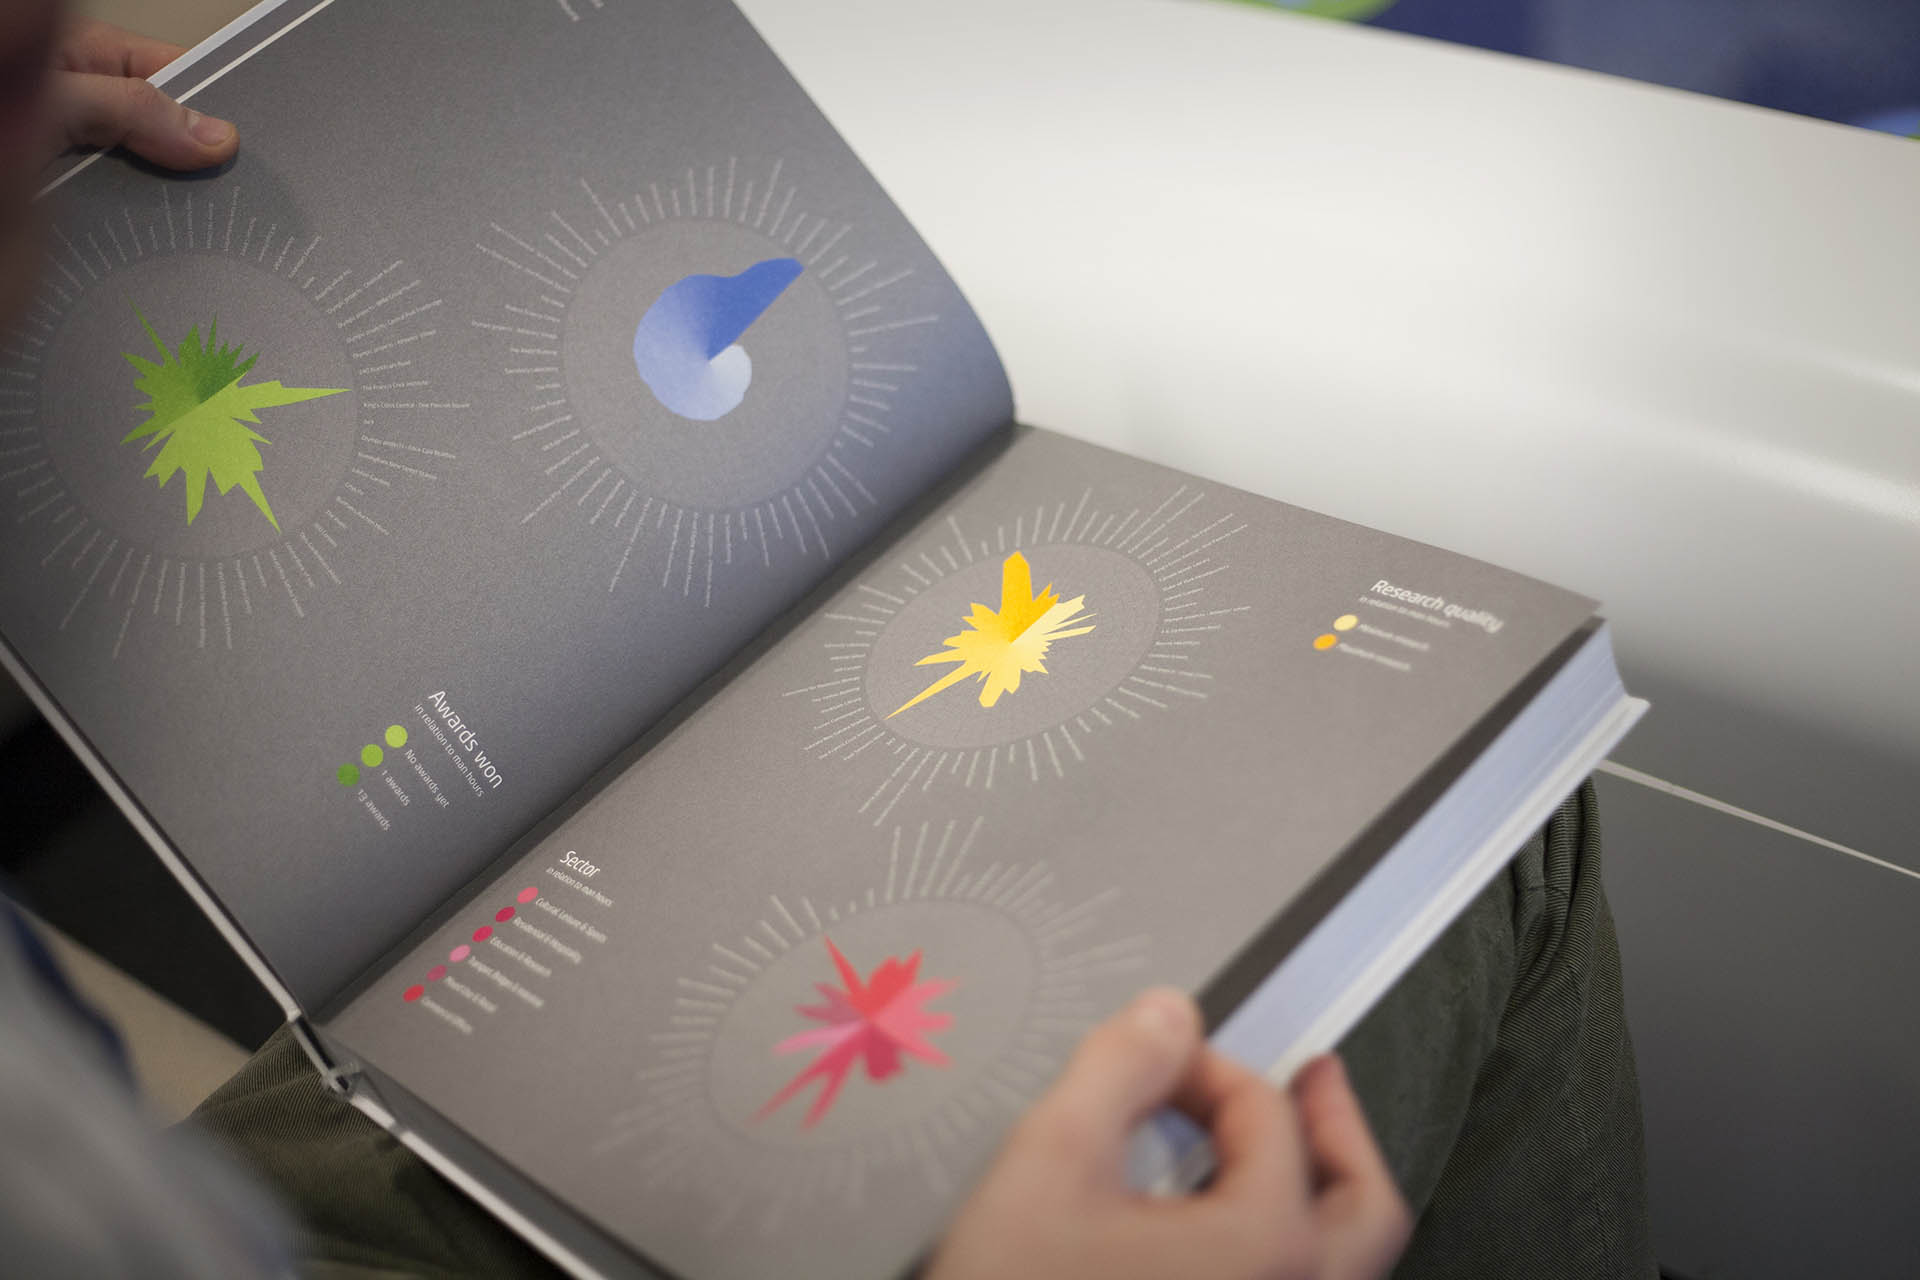 Double spread visualising data for deliverance of Design, featuring quality research